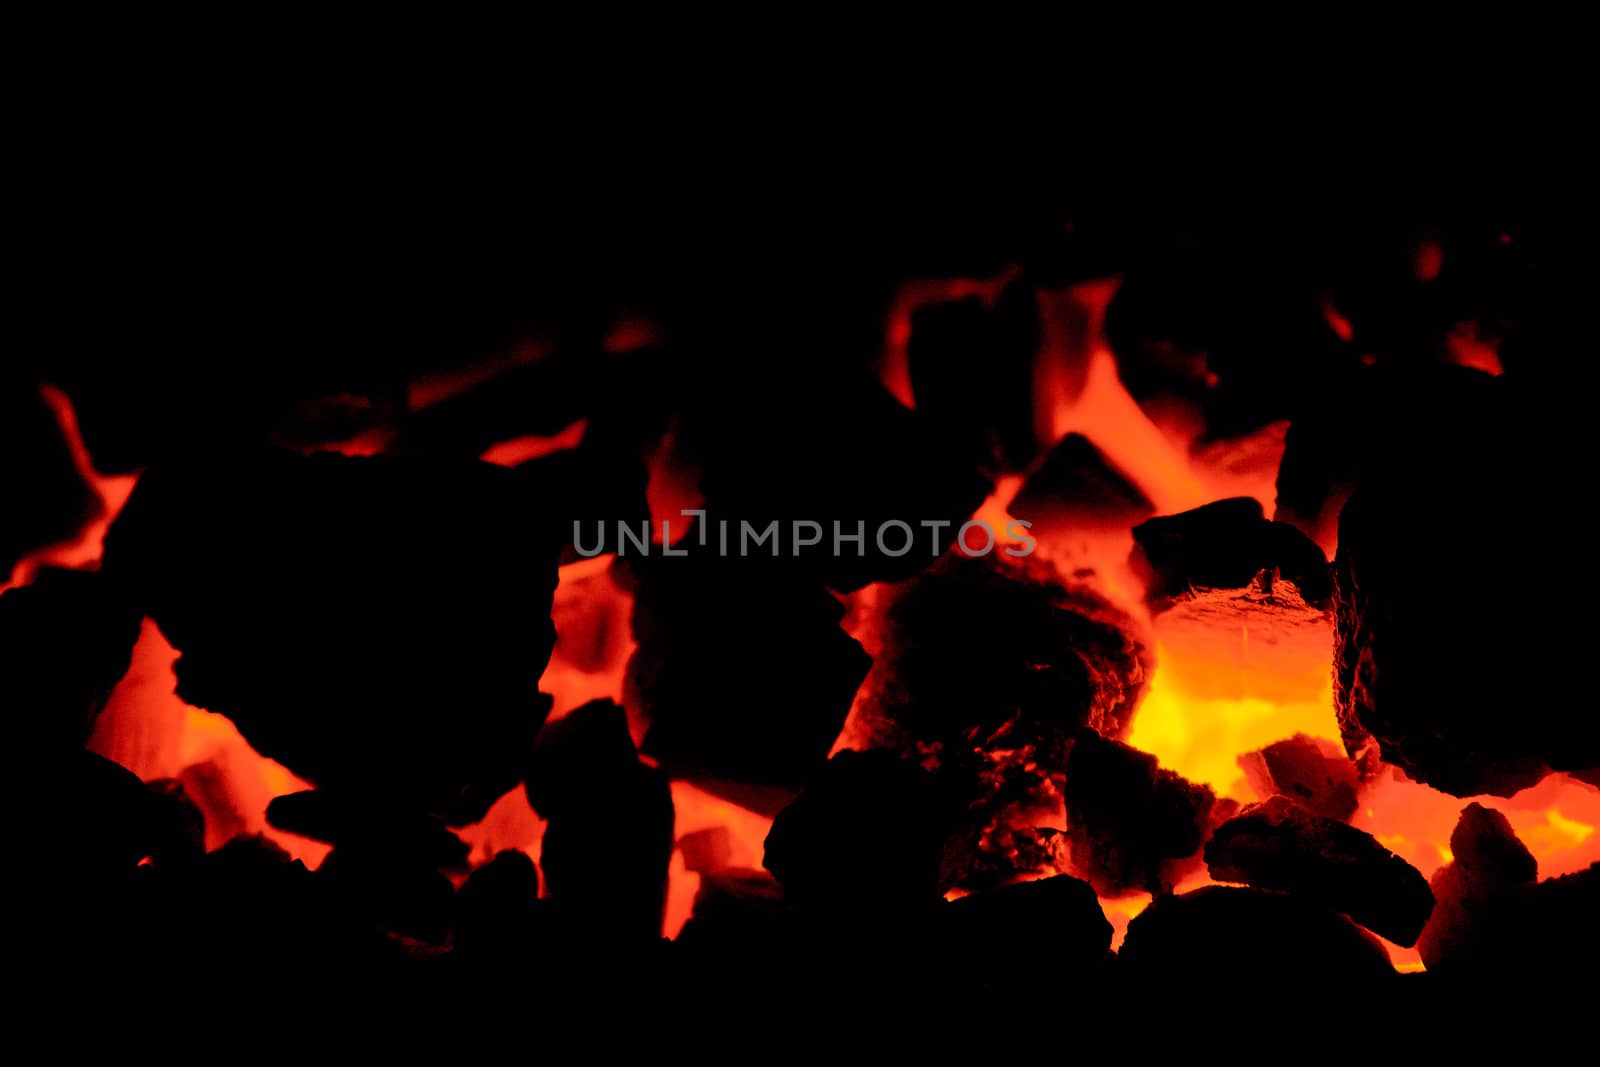 Coal anthracite. Burning coal in the furnace of a solid fuel boiler. Heat. Flame. Forge furnace. Hot coal. Burning solid fuel.